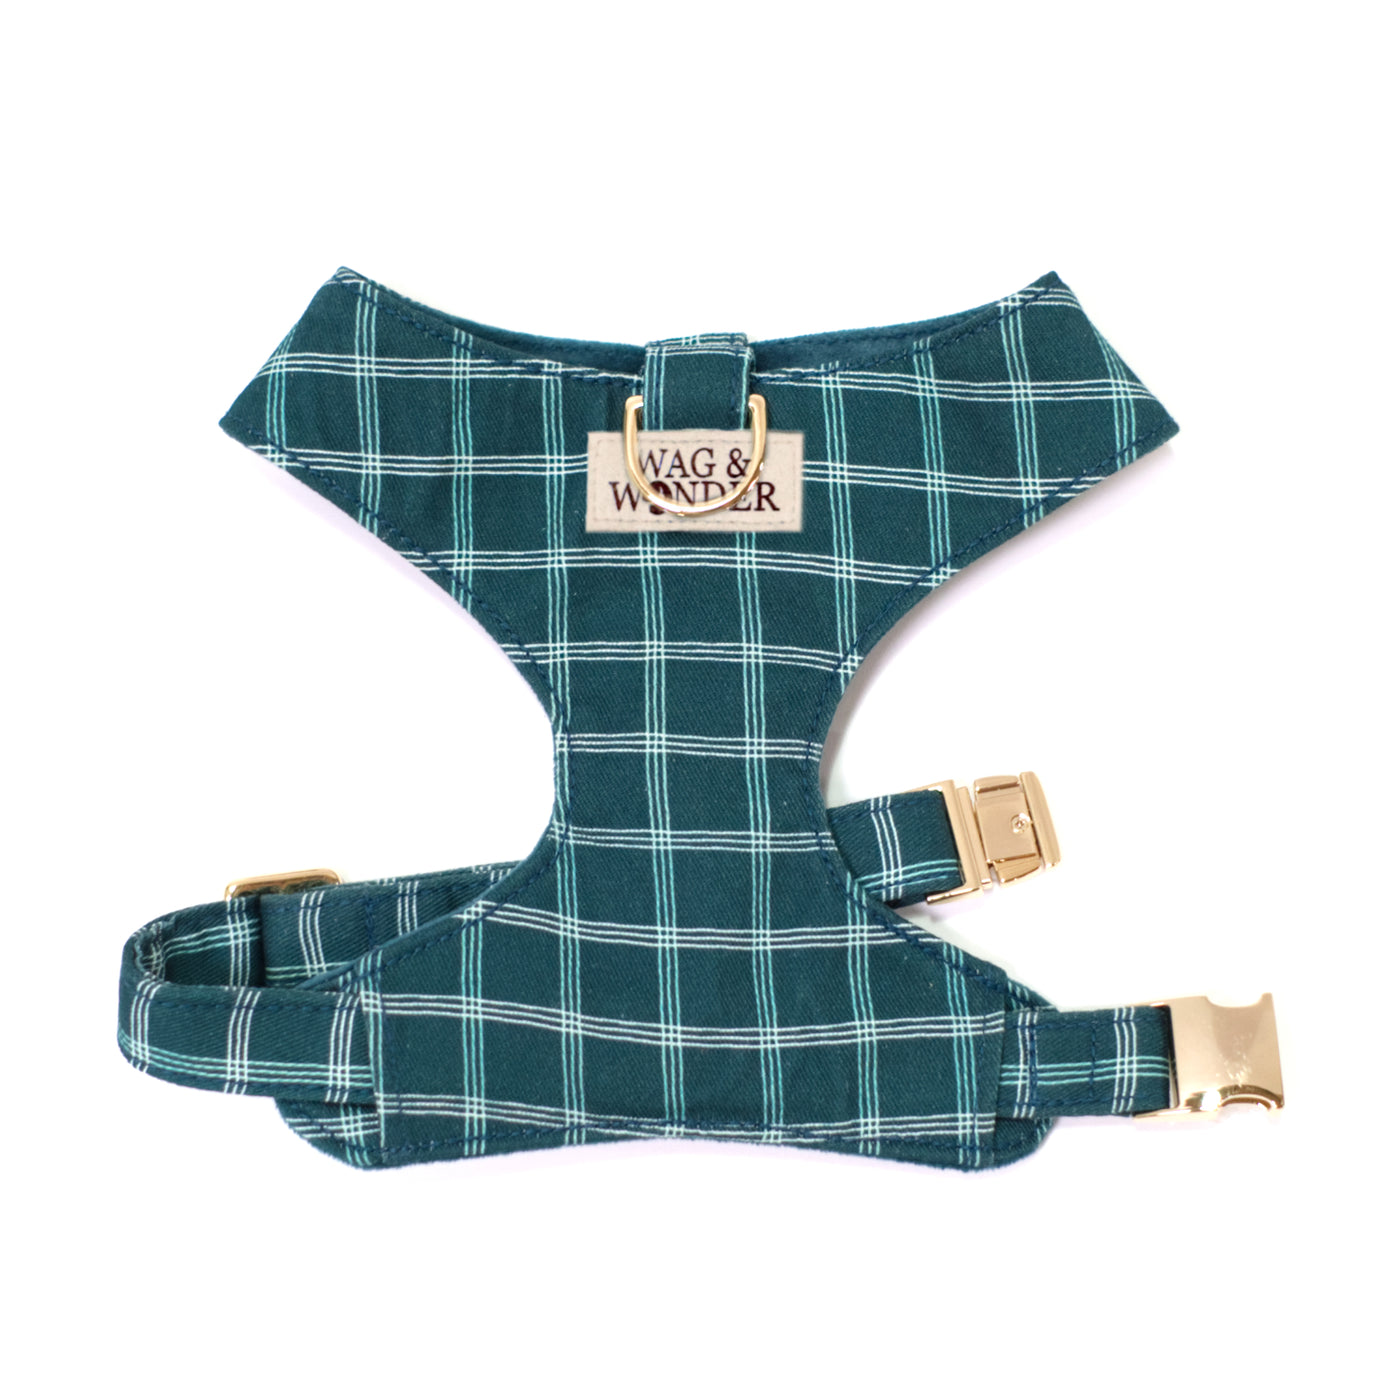 XS reversible dog harness in teal plaid print with gold hardware.